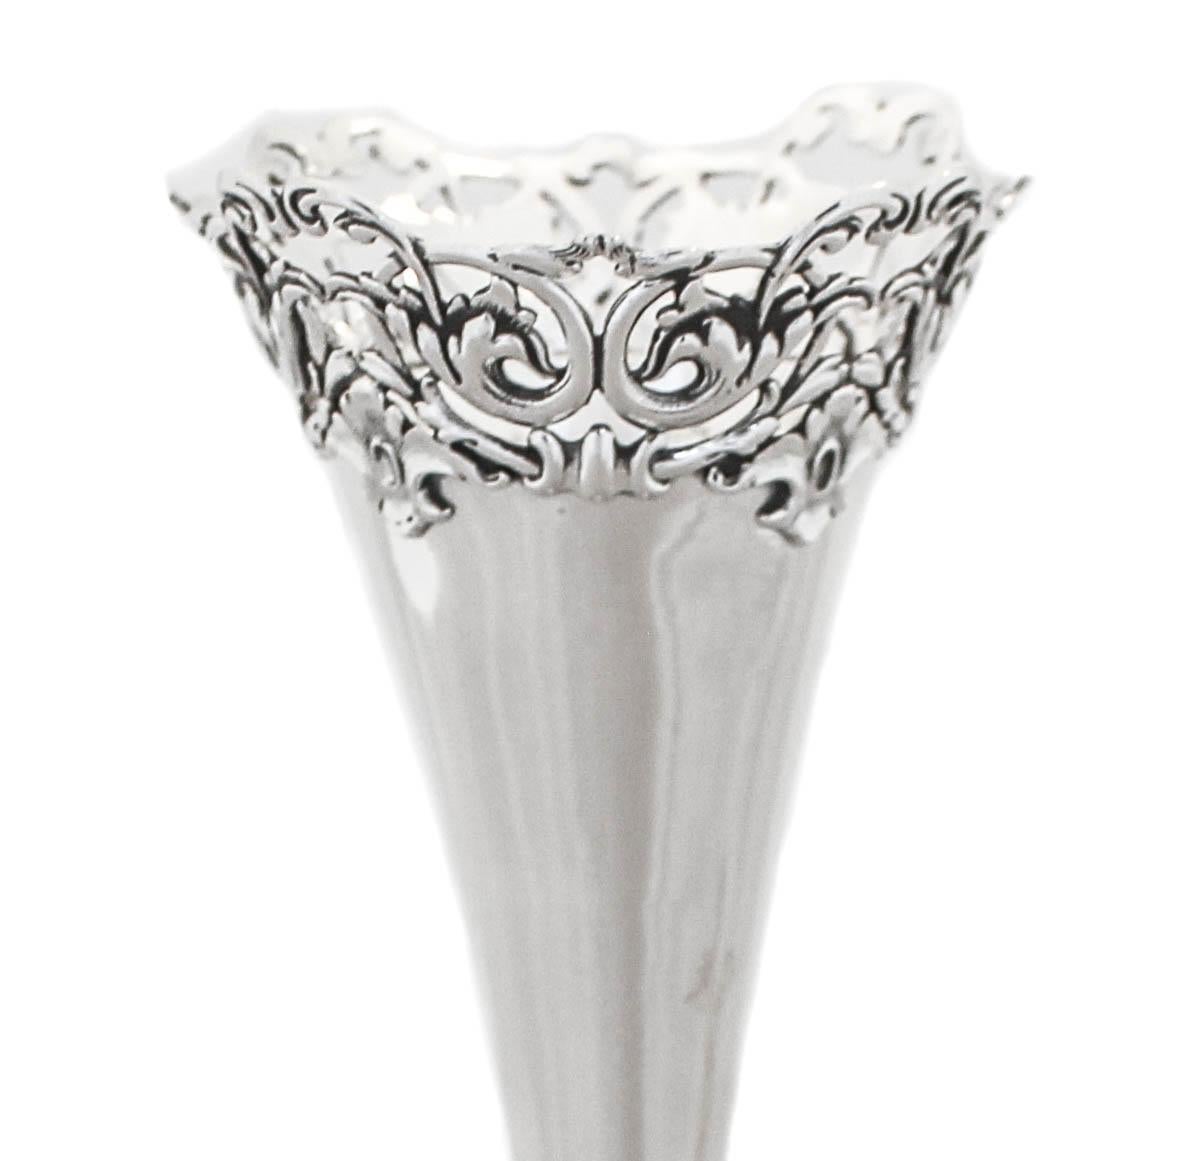 Being offered is a sterling silver bud vase by Theodore B Starr of New York, circa 1930’s. Both the top and base have an ornate open work design with scalloping that is rich and impressive. The vase opens outwards toward the top and has a trumpet